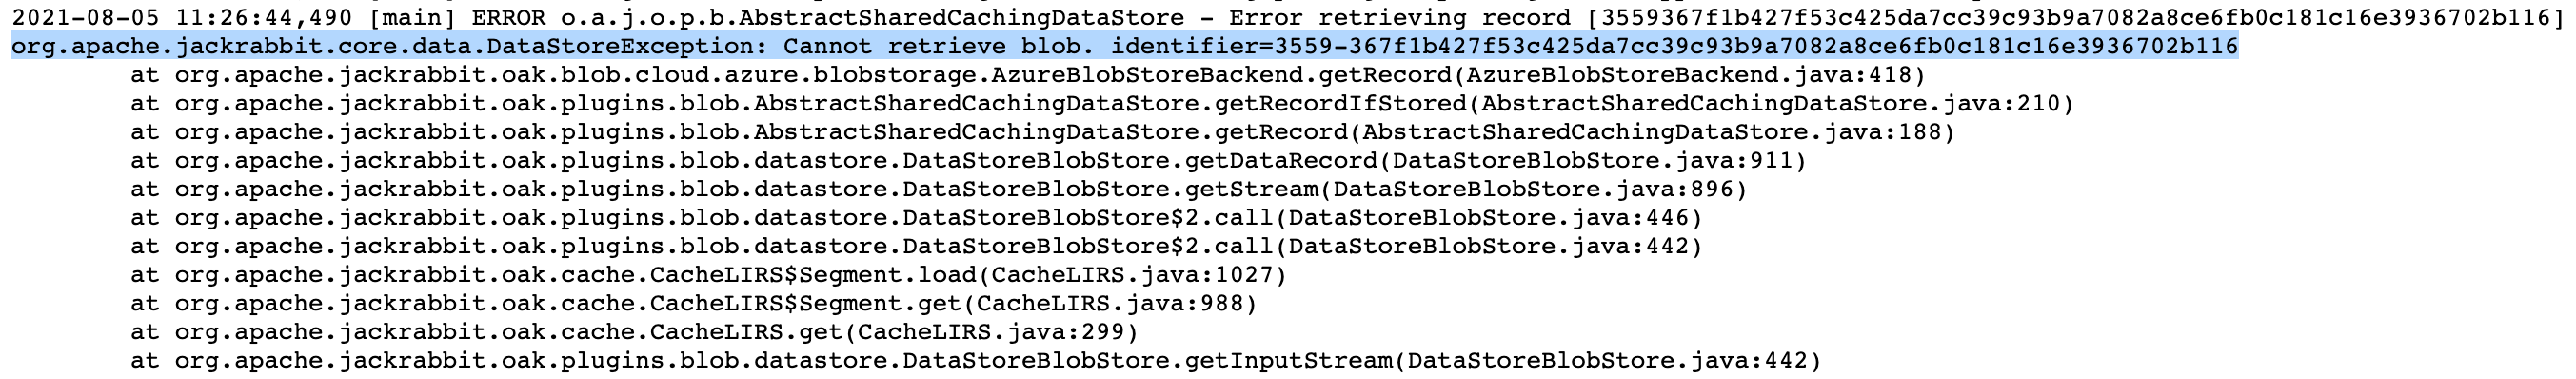 Stacktrace when the migration fails to find a blob in the data store